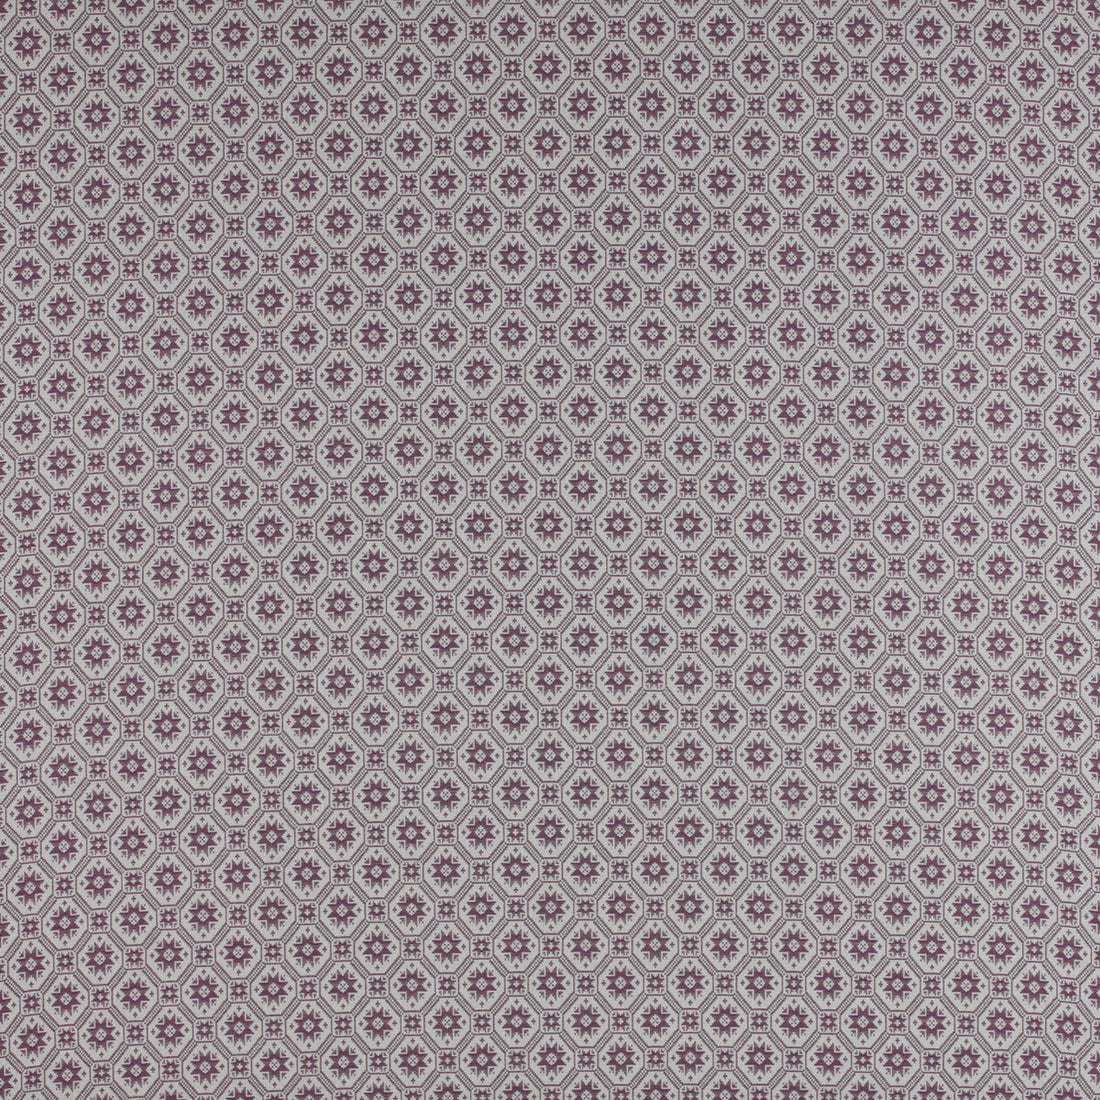 Delicias fabric in lavanda color - pattern GDT5198.006.0 - by Gaston y Daniela in the Madrid collection